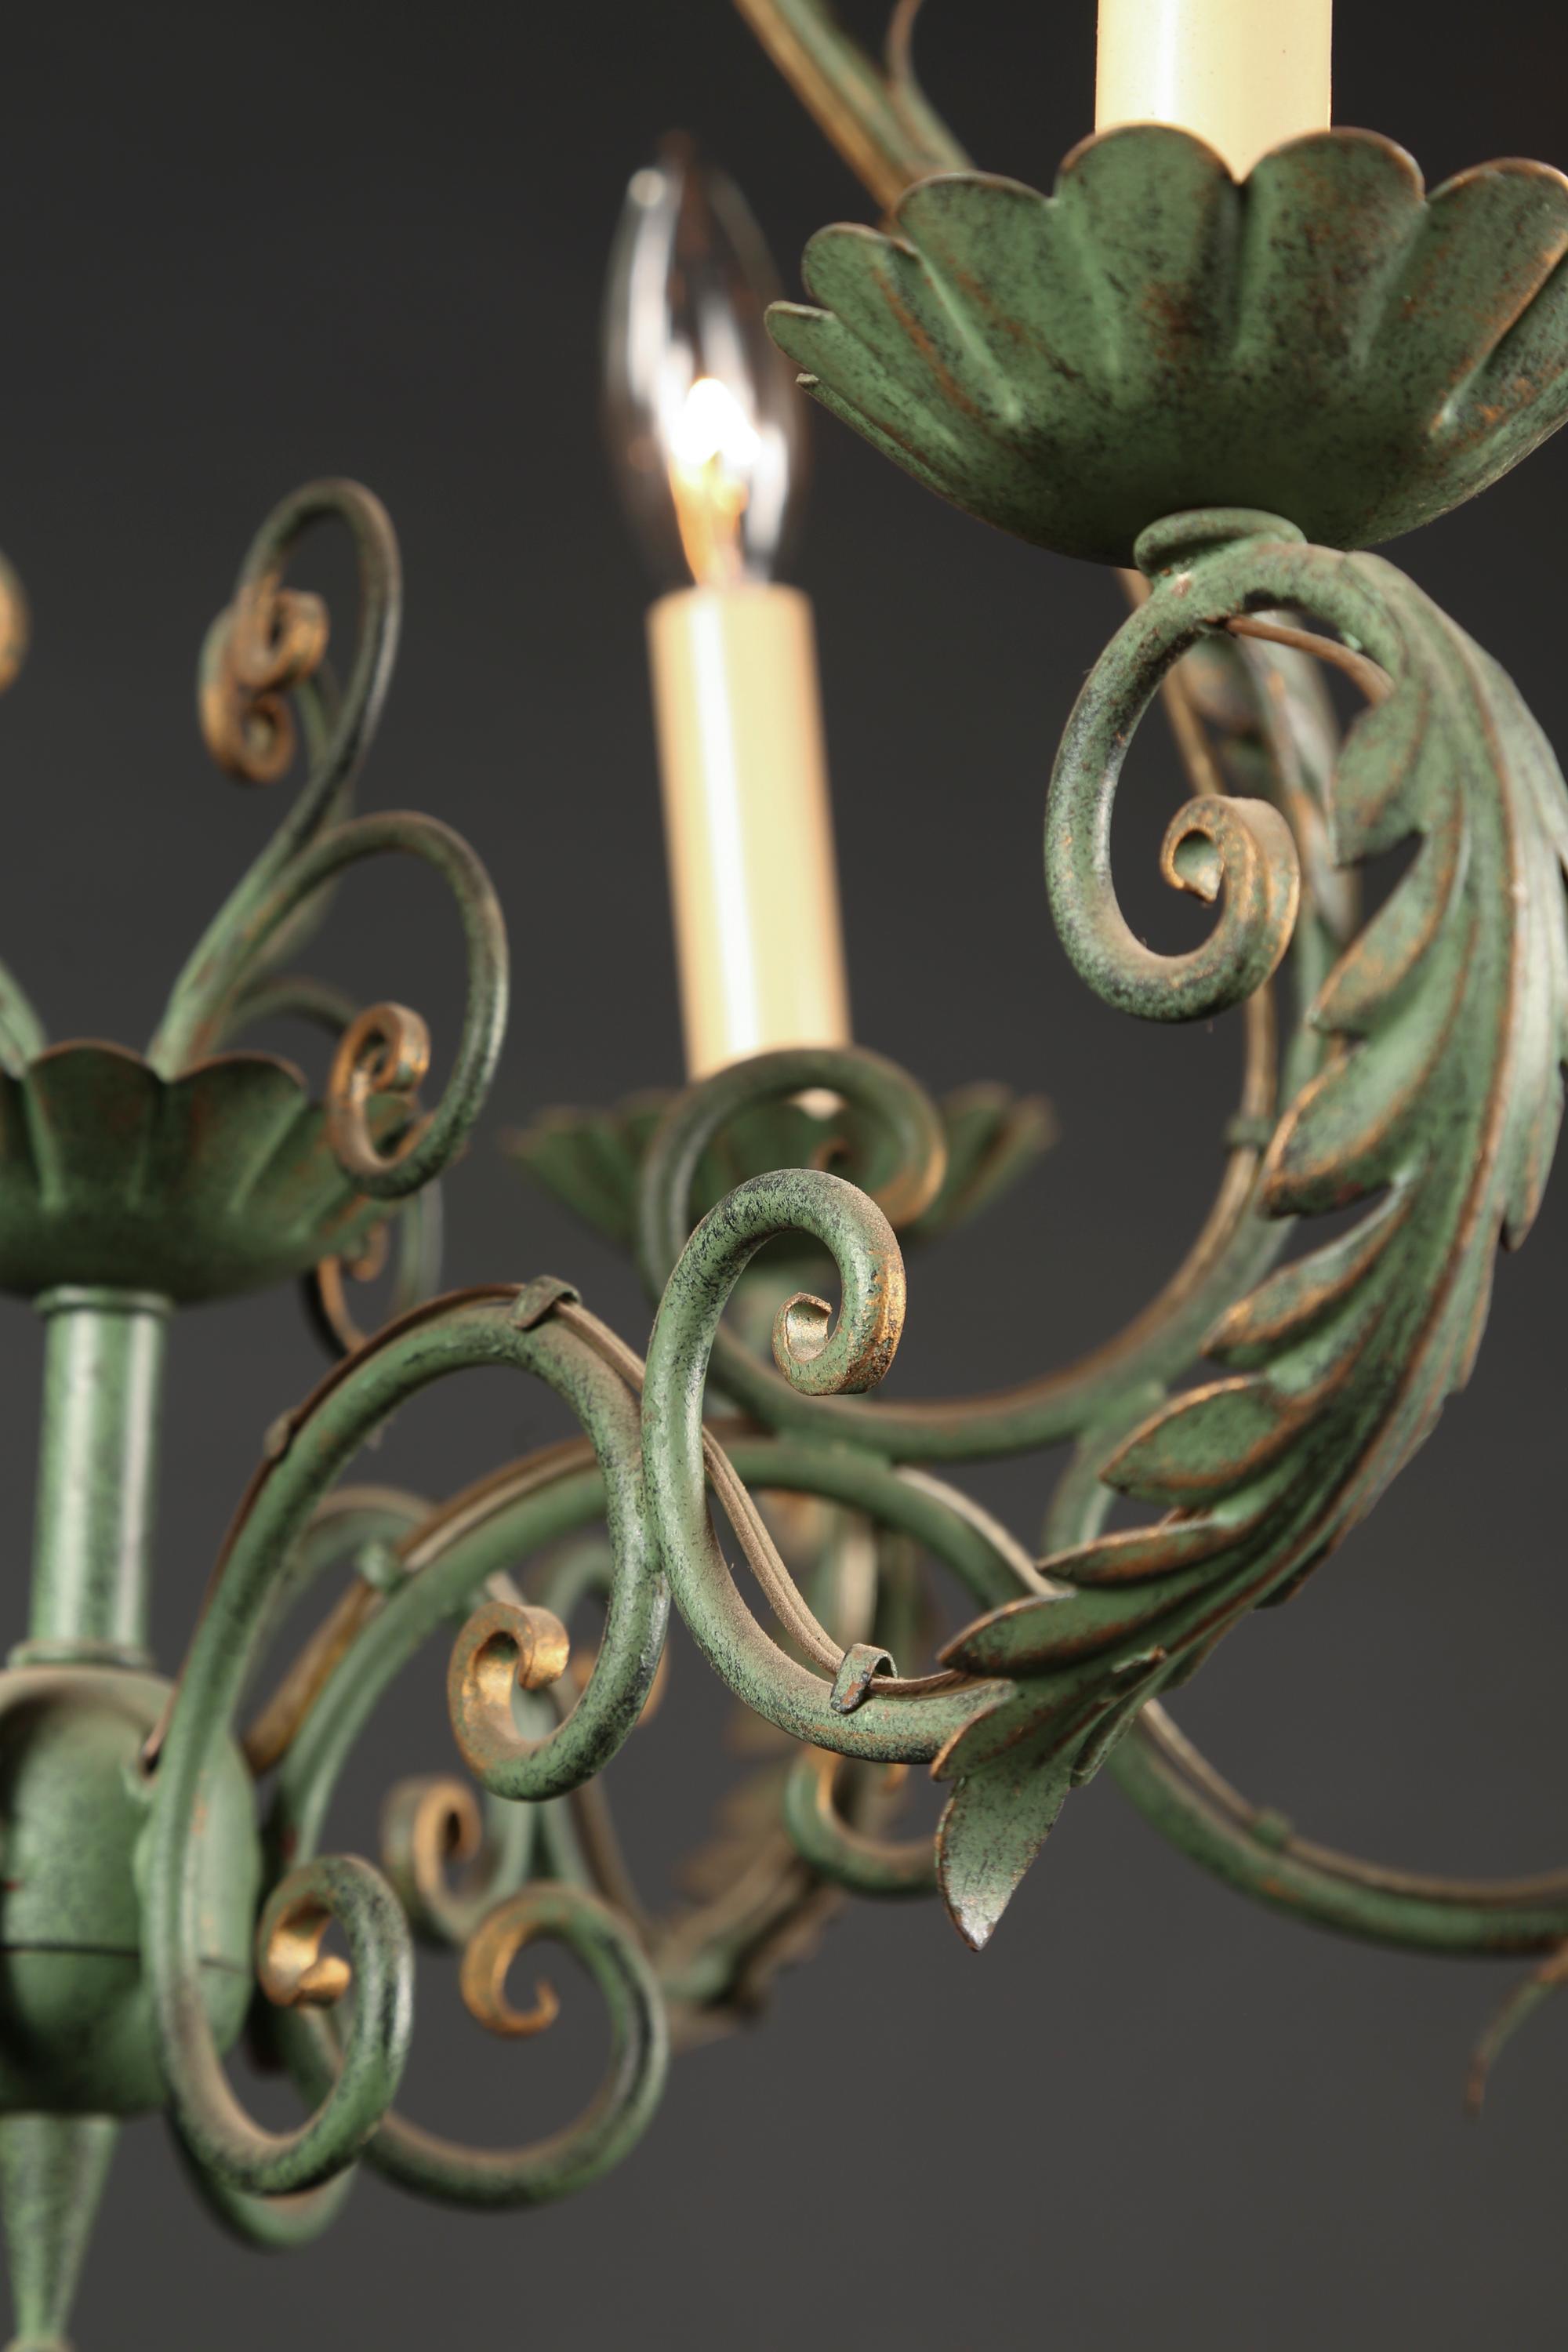 This French Louis XV style wrought iron chandeliers was created in the mid 20th century and features iron bobeches under the six lights. The arms are adorned with acanthus leaves and scroll work can be found throughout the classic ‘bird cage’ shaped